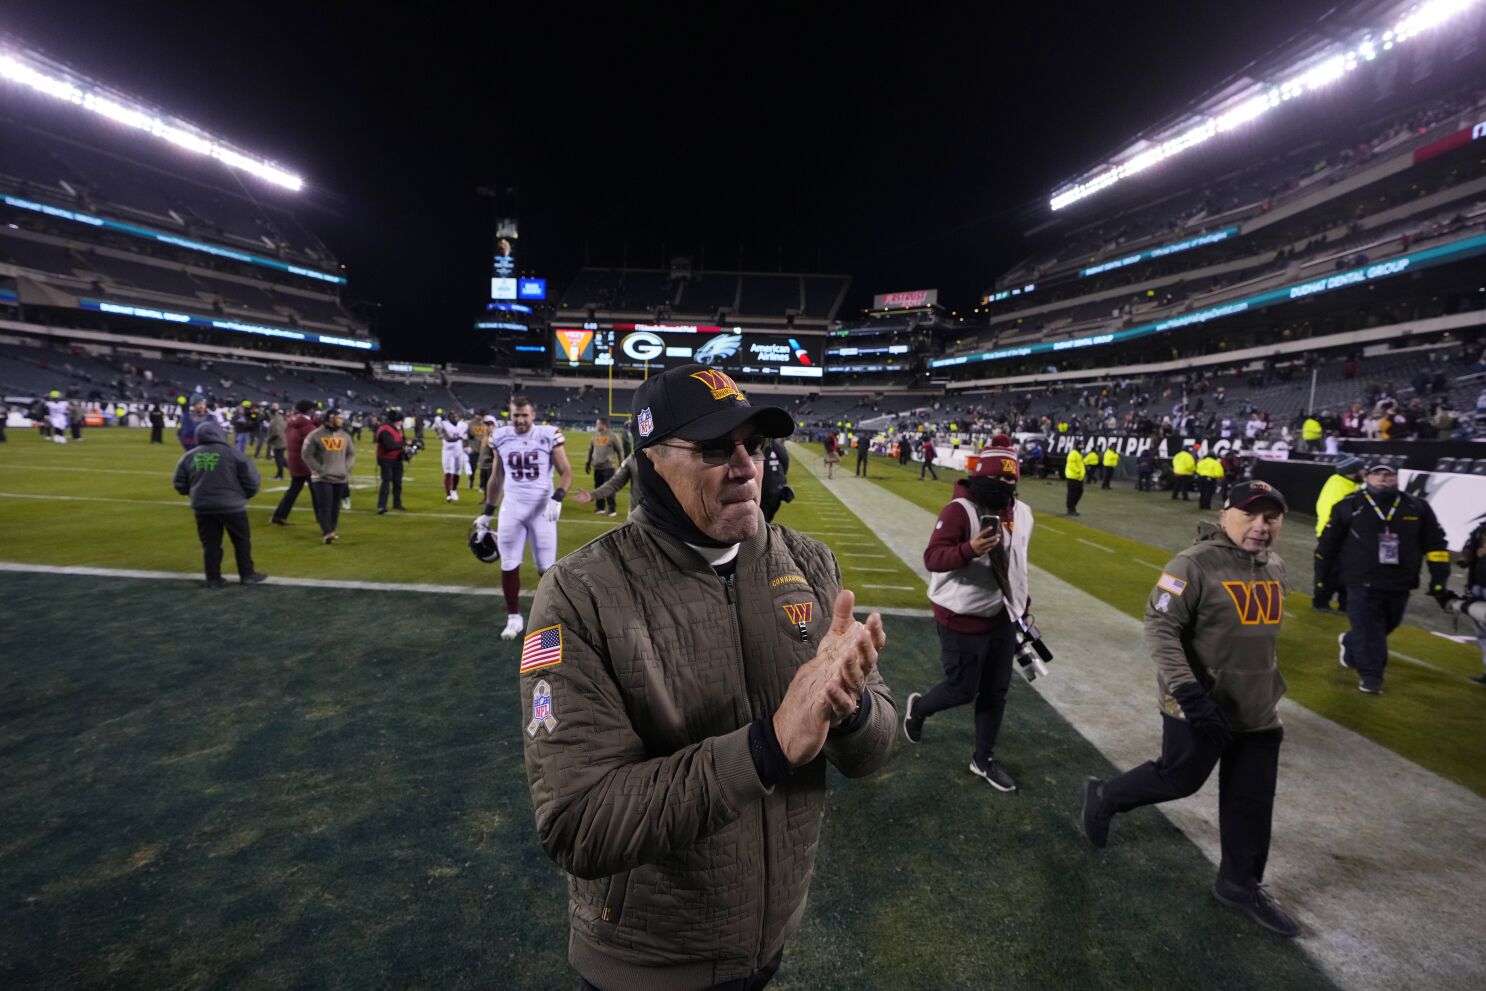 Fair or not? Washington Commanders coach Ron Rivera furious after 2-point conversion penalty vs NY Giants